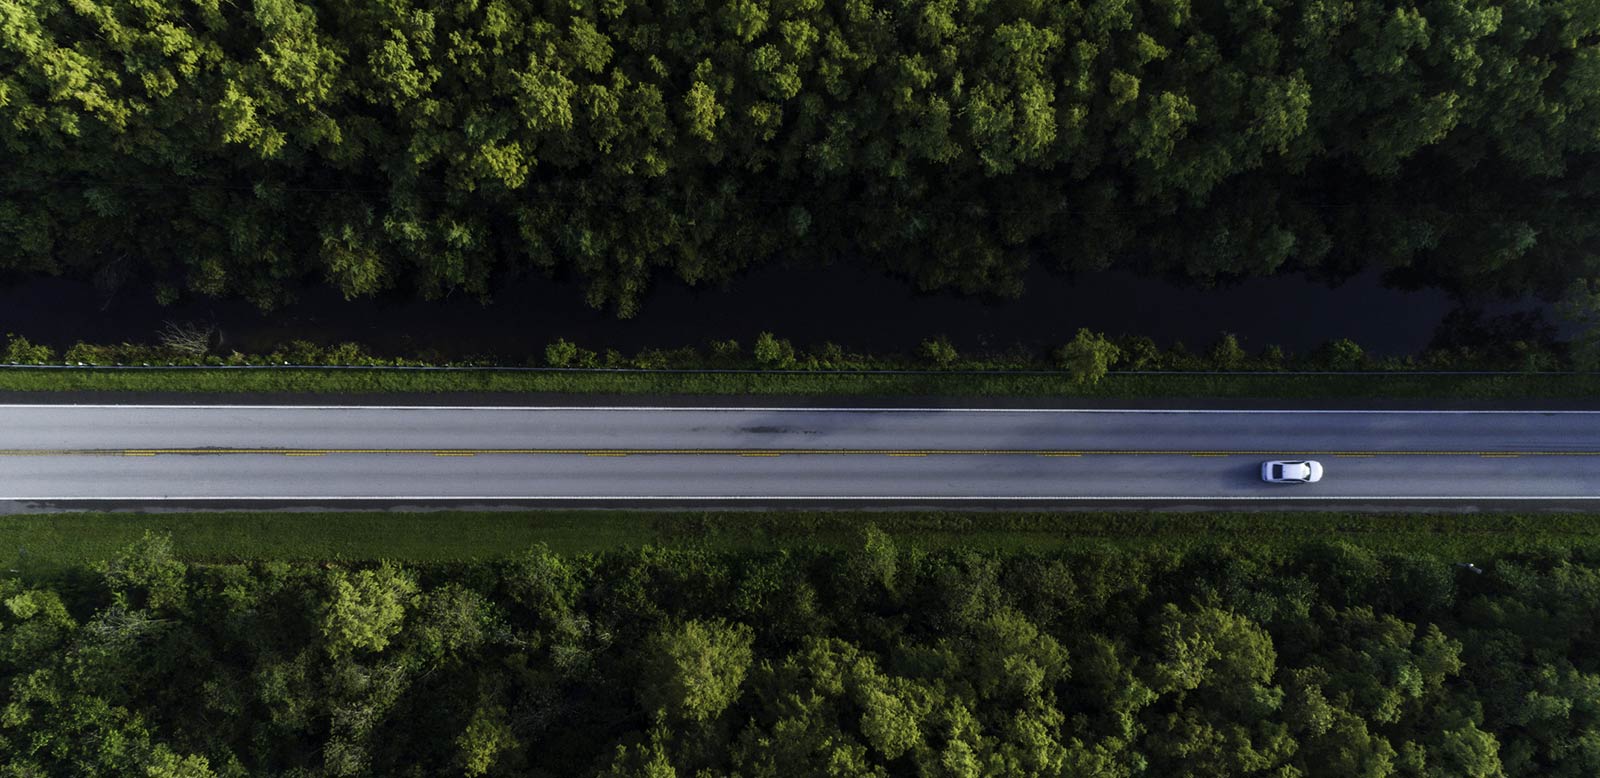 Overhead shot of car driving down road